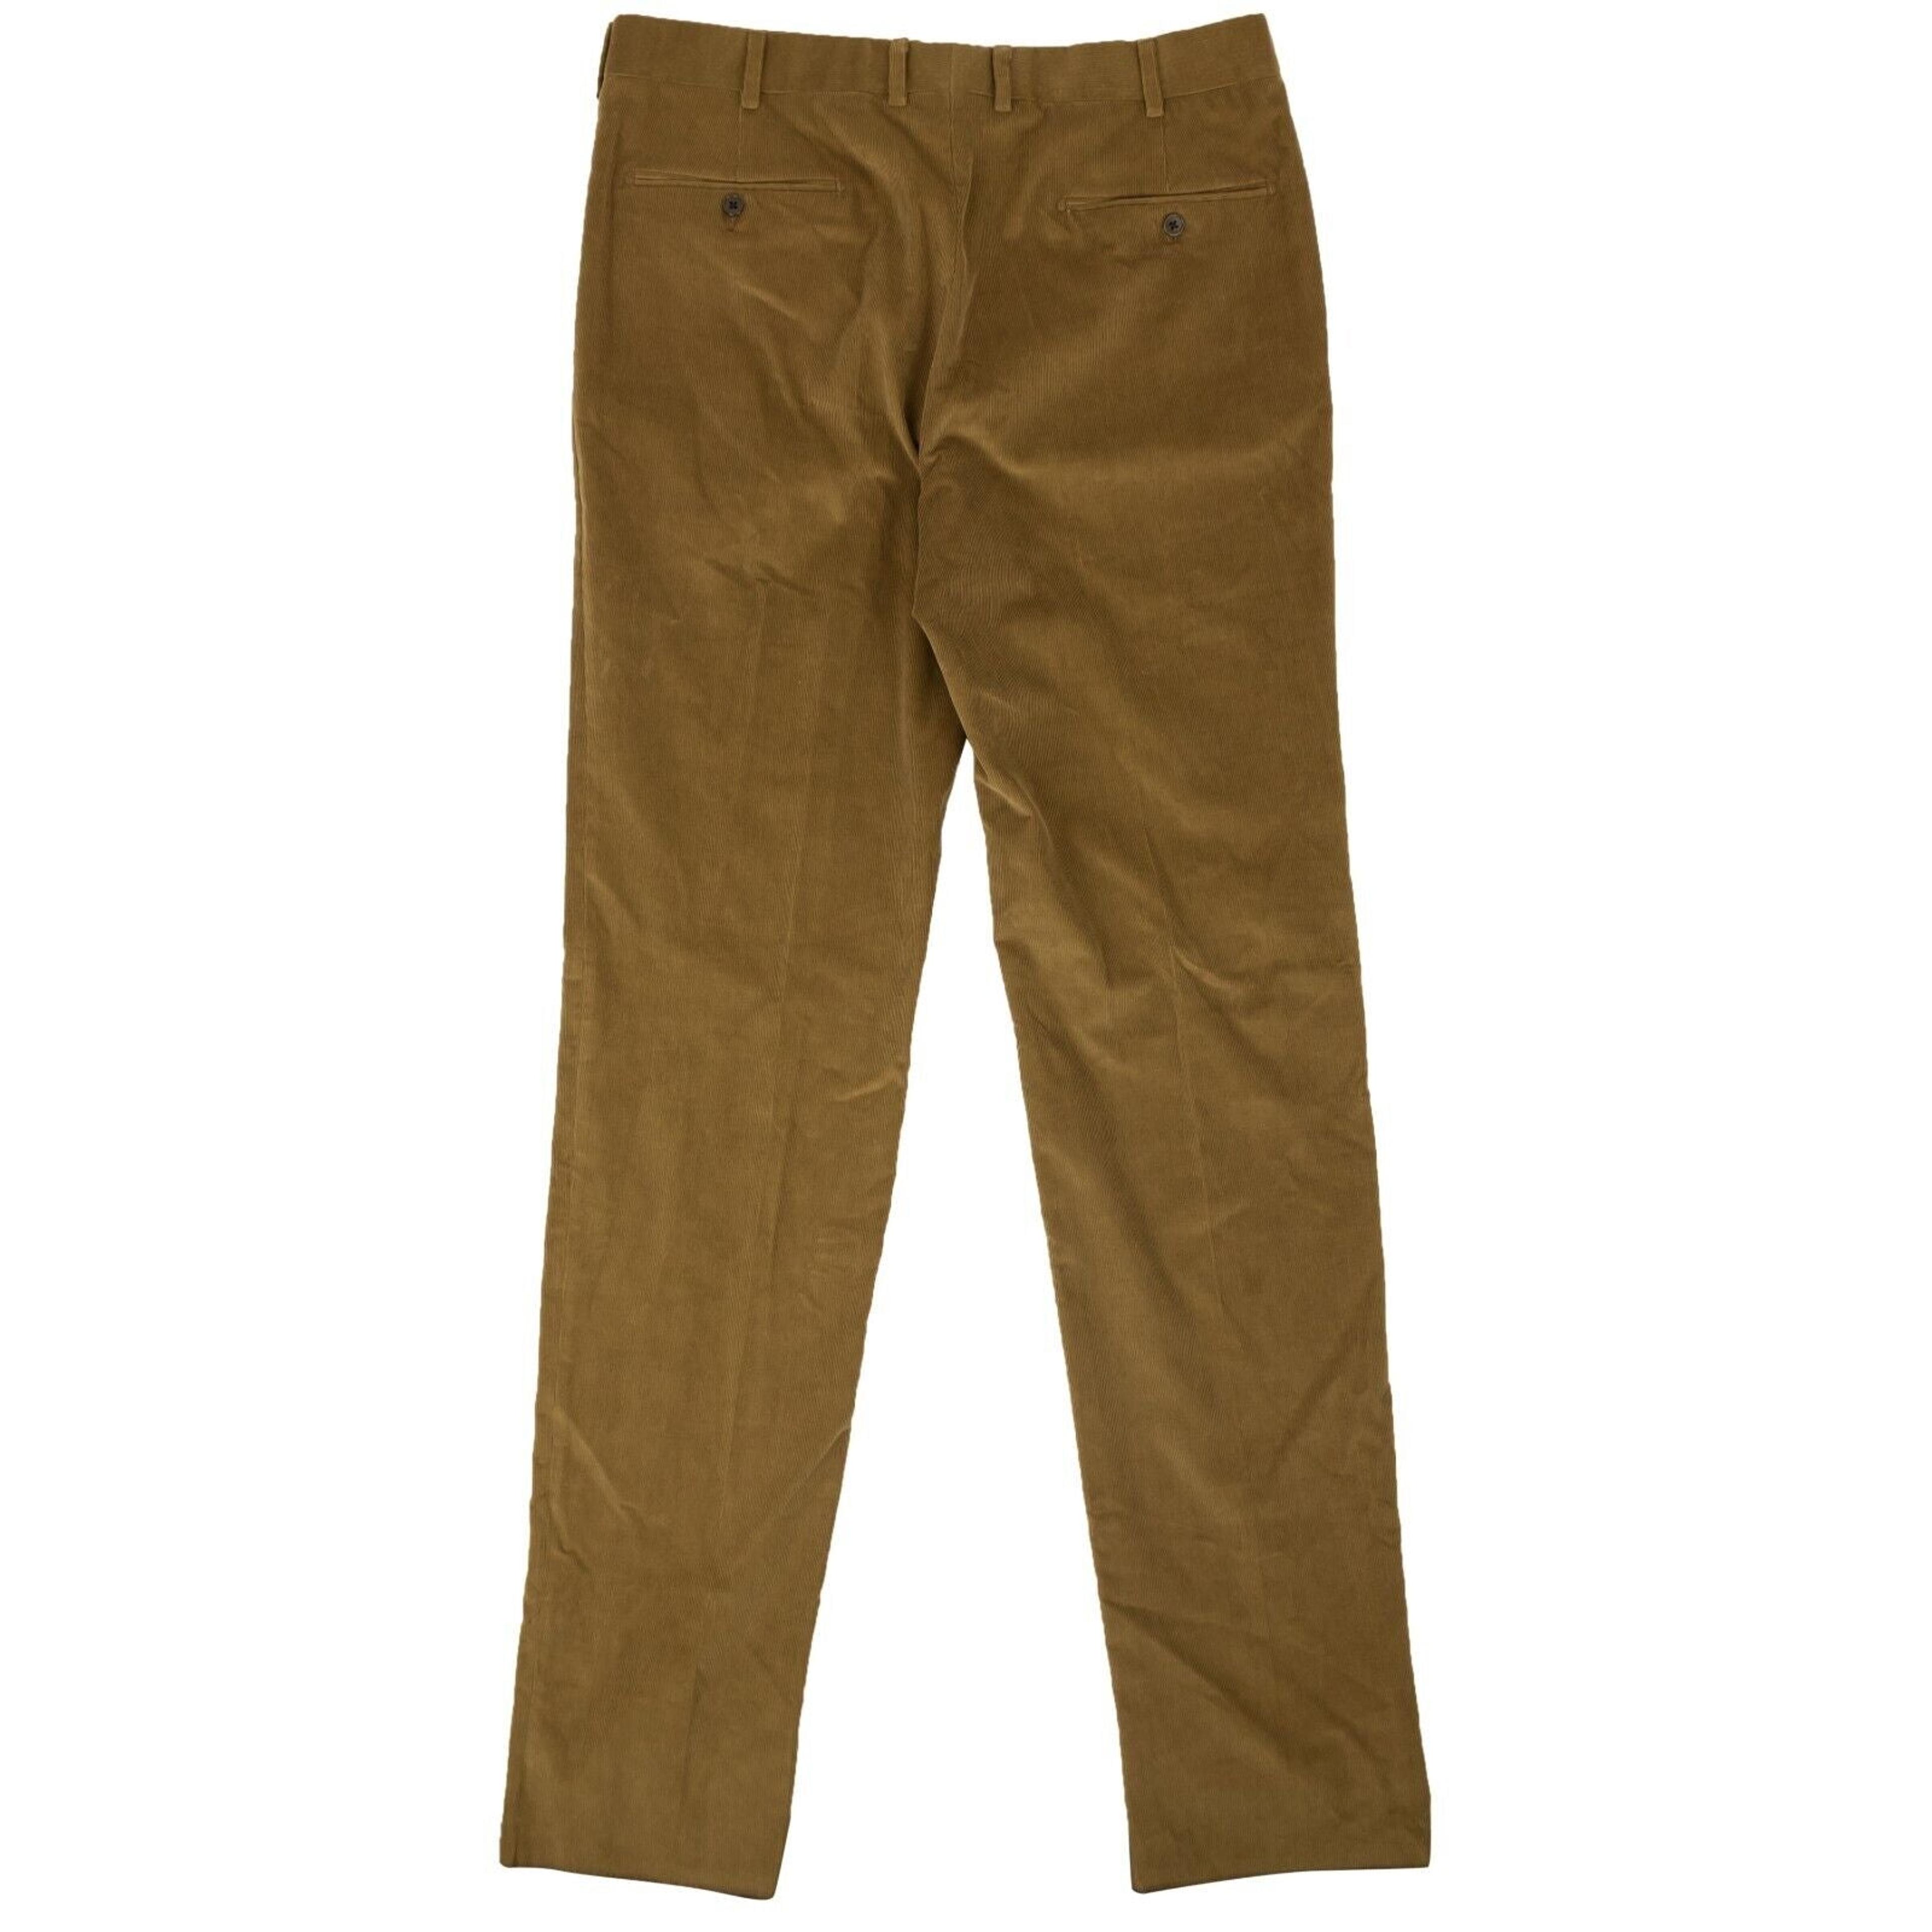 Alternate View 3 of Brown Cotton Blend Corduroy Casual Pants